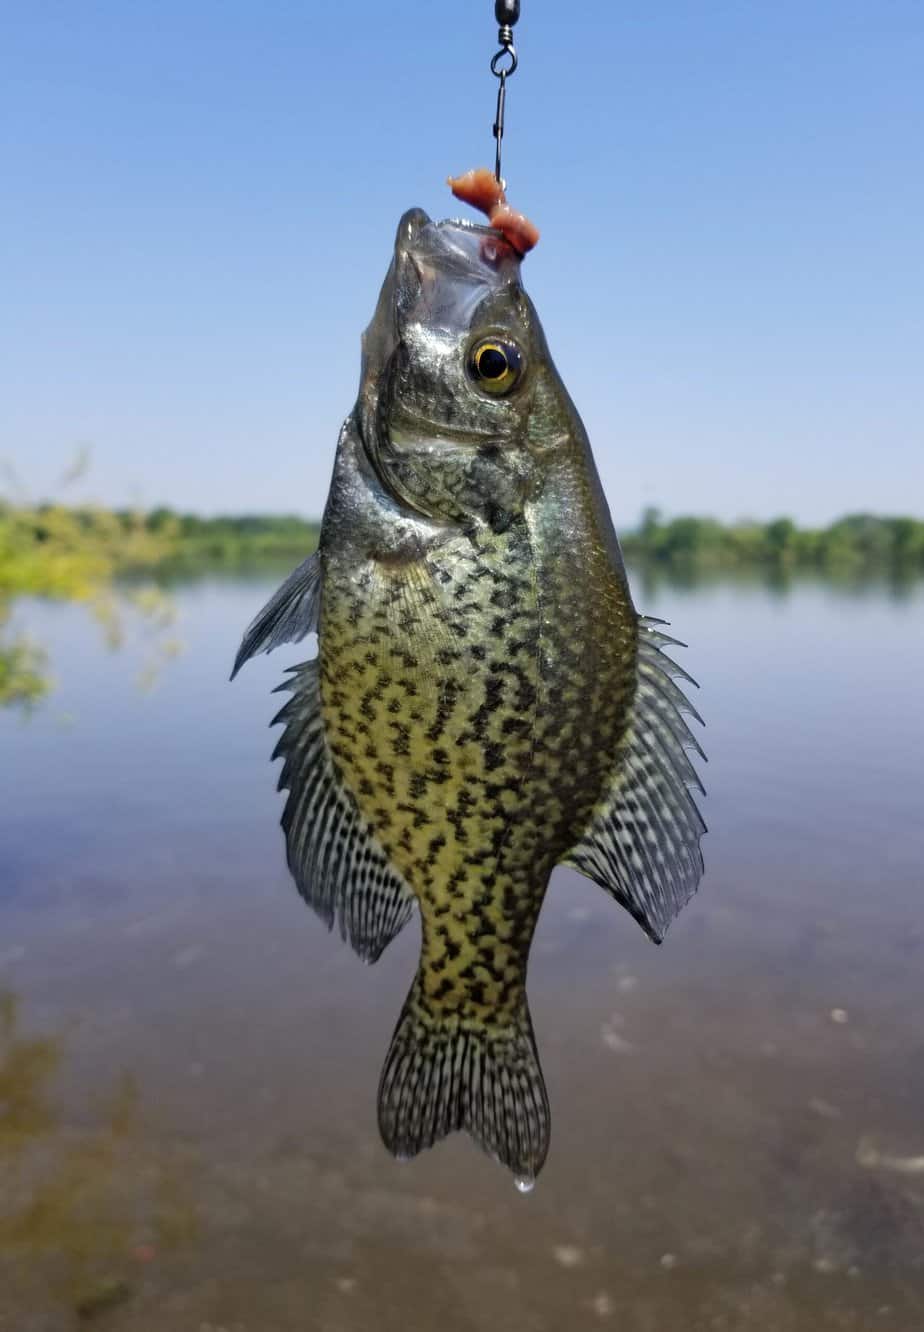 A beautiful crappie on a hook with worms